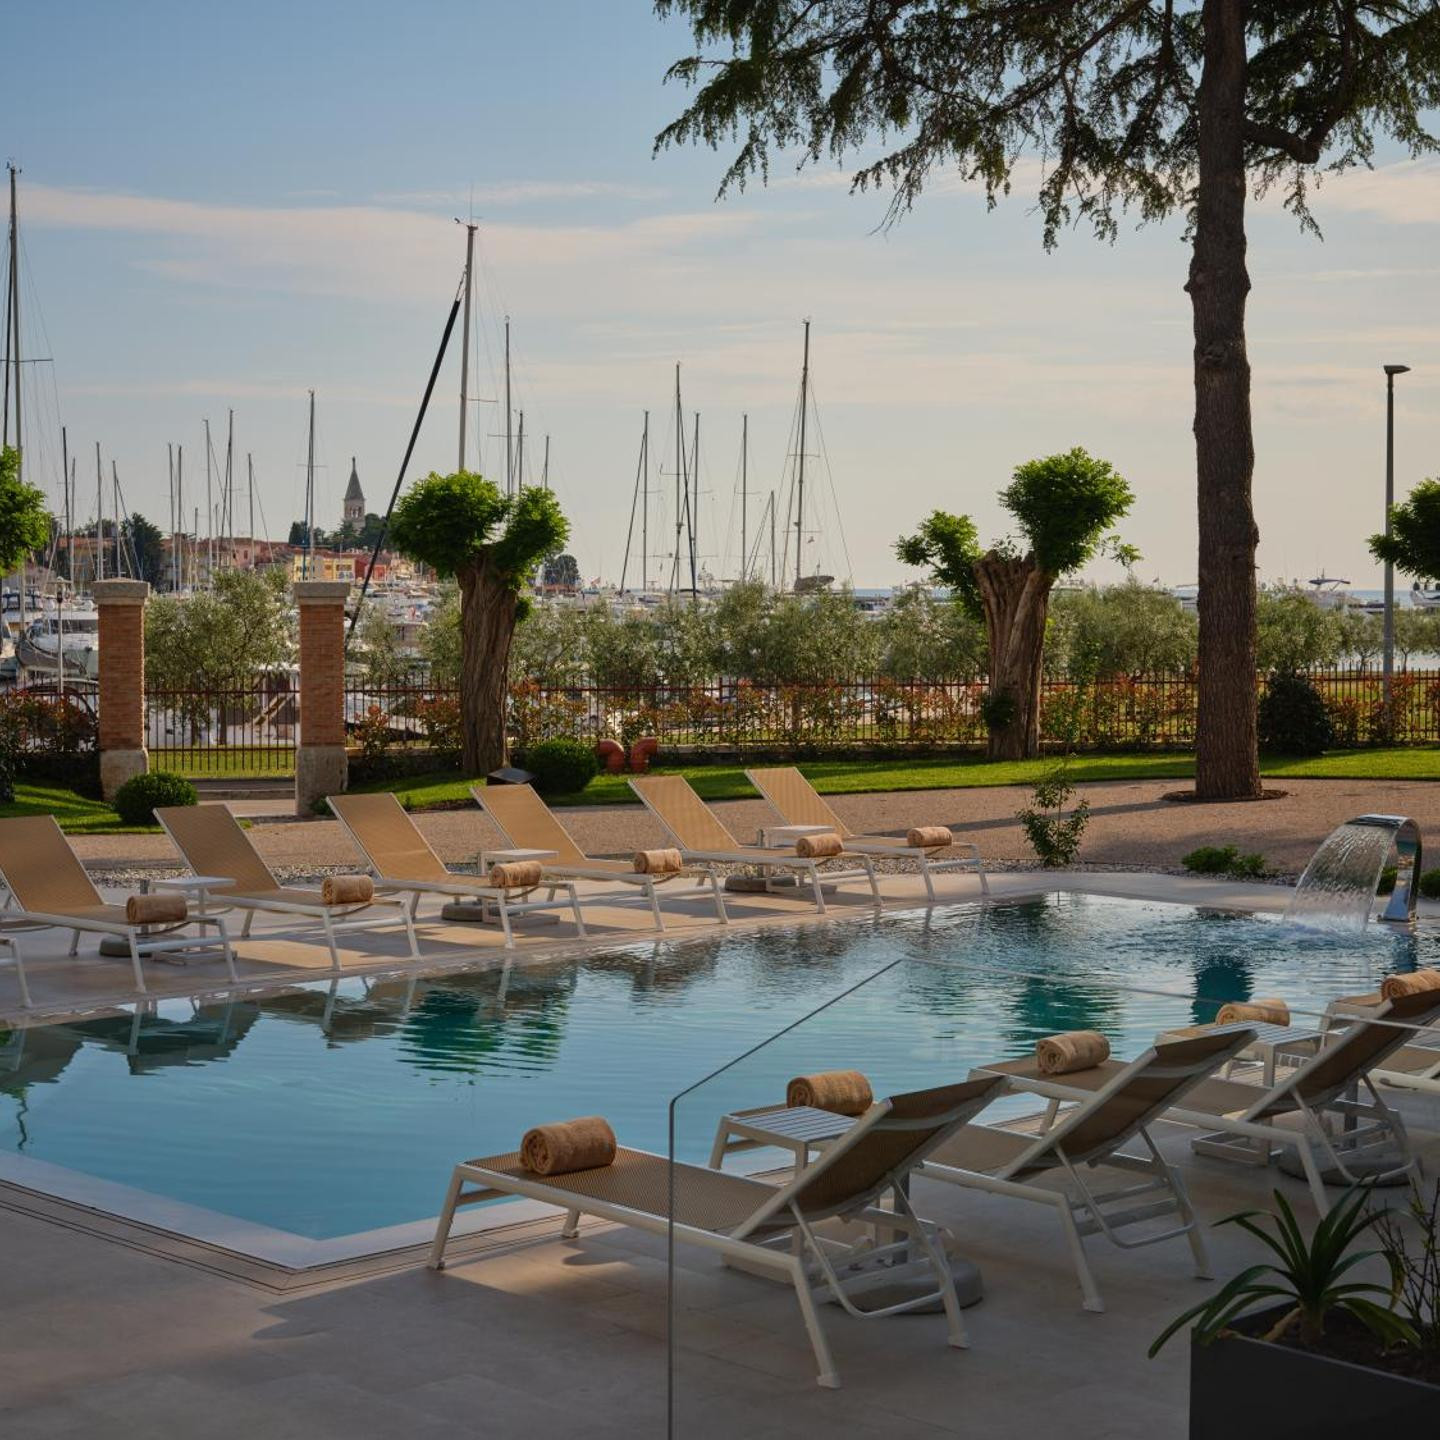 Palazzo Rainis Hotel & Spa - Small Luxury Hotel - Adults Only